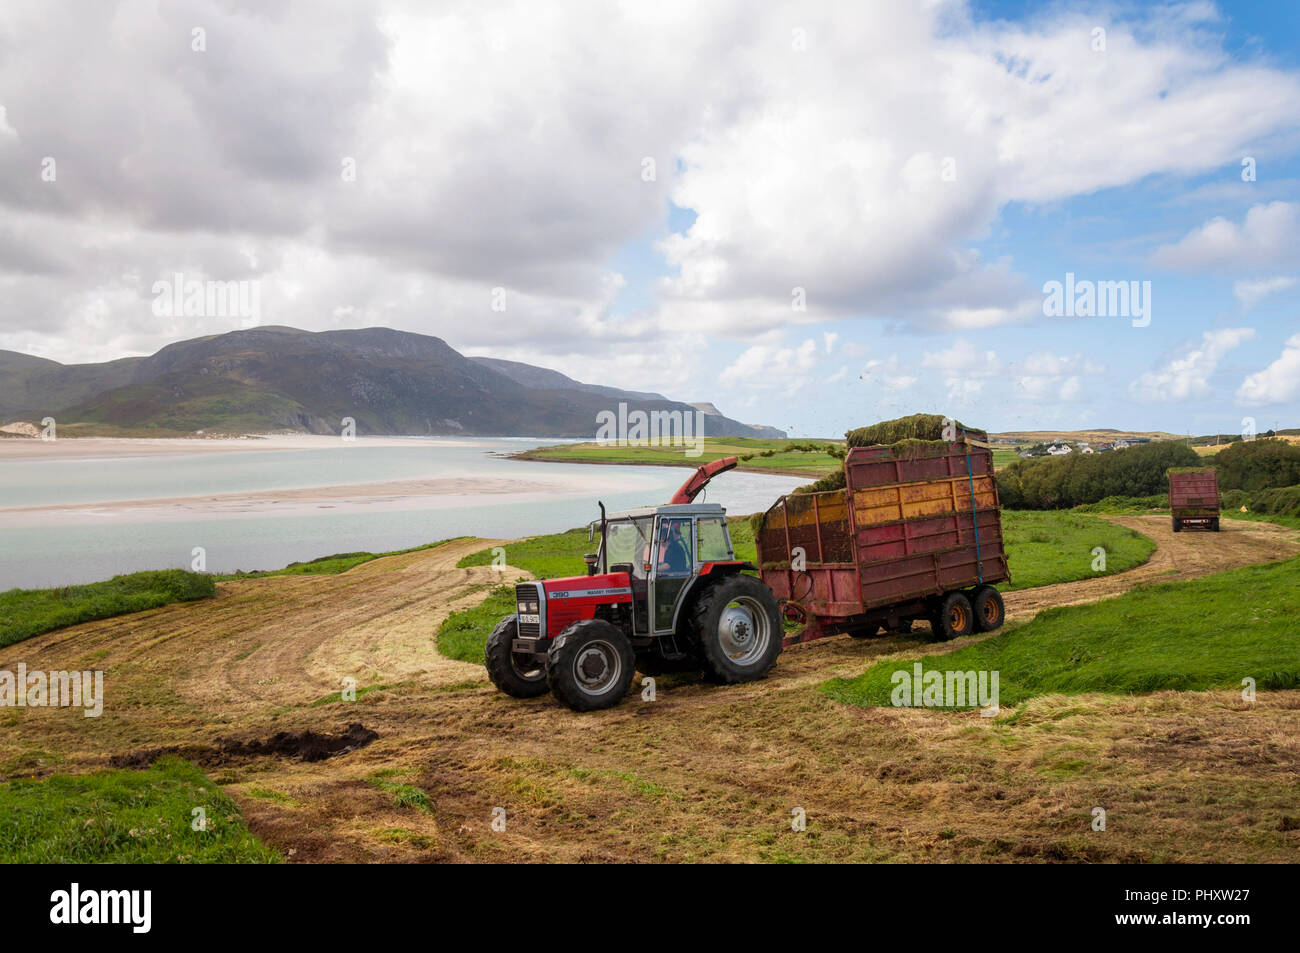 Ardara, County Donegal, Ireland weather. 3rd September 2018. Farmers make the most of an overcast but dry day to cut silage grass as winter fodder for their livestock on the north-west coast. Credit: Richard Wayman/Alamy Live News Stock Photo